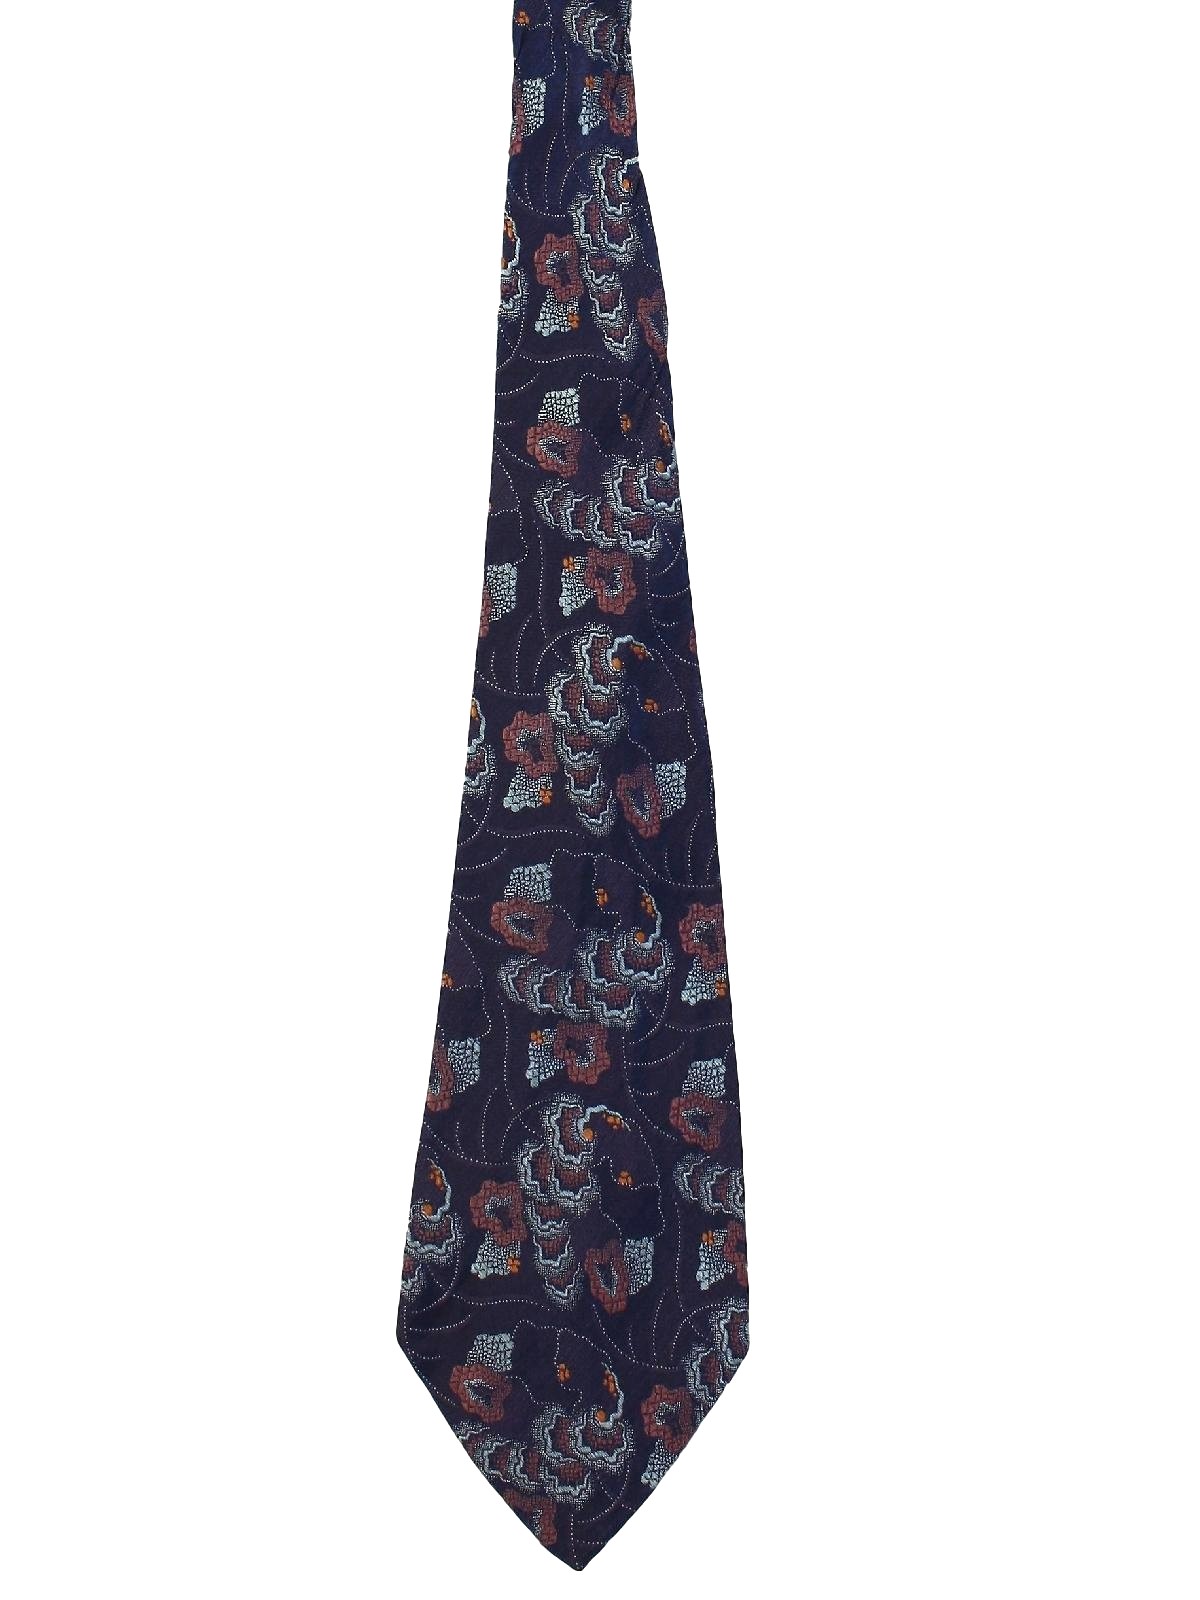 1940's Vintage Neck Tie: Early 40s -No Label- Mens navy blue background ...